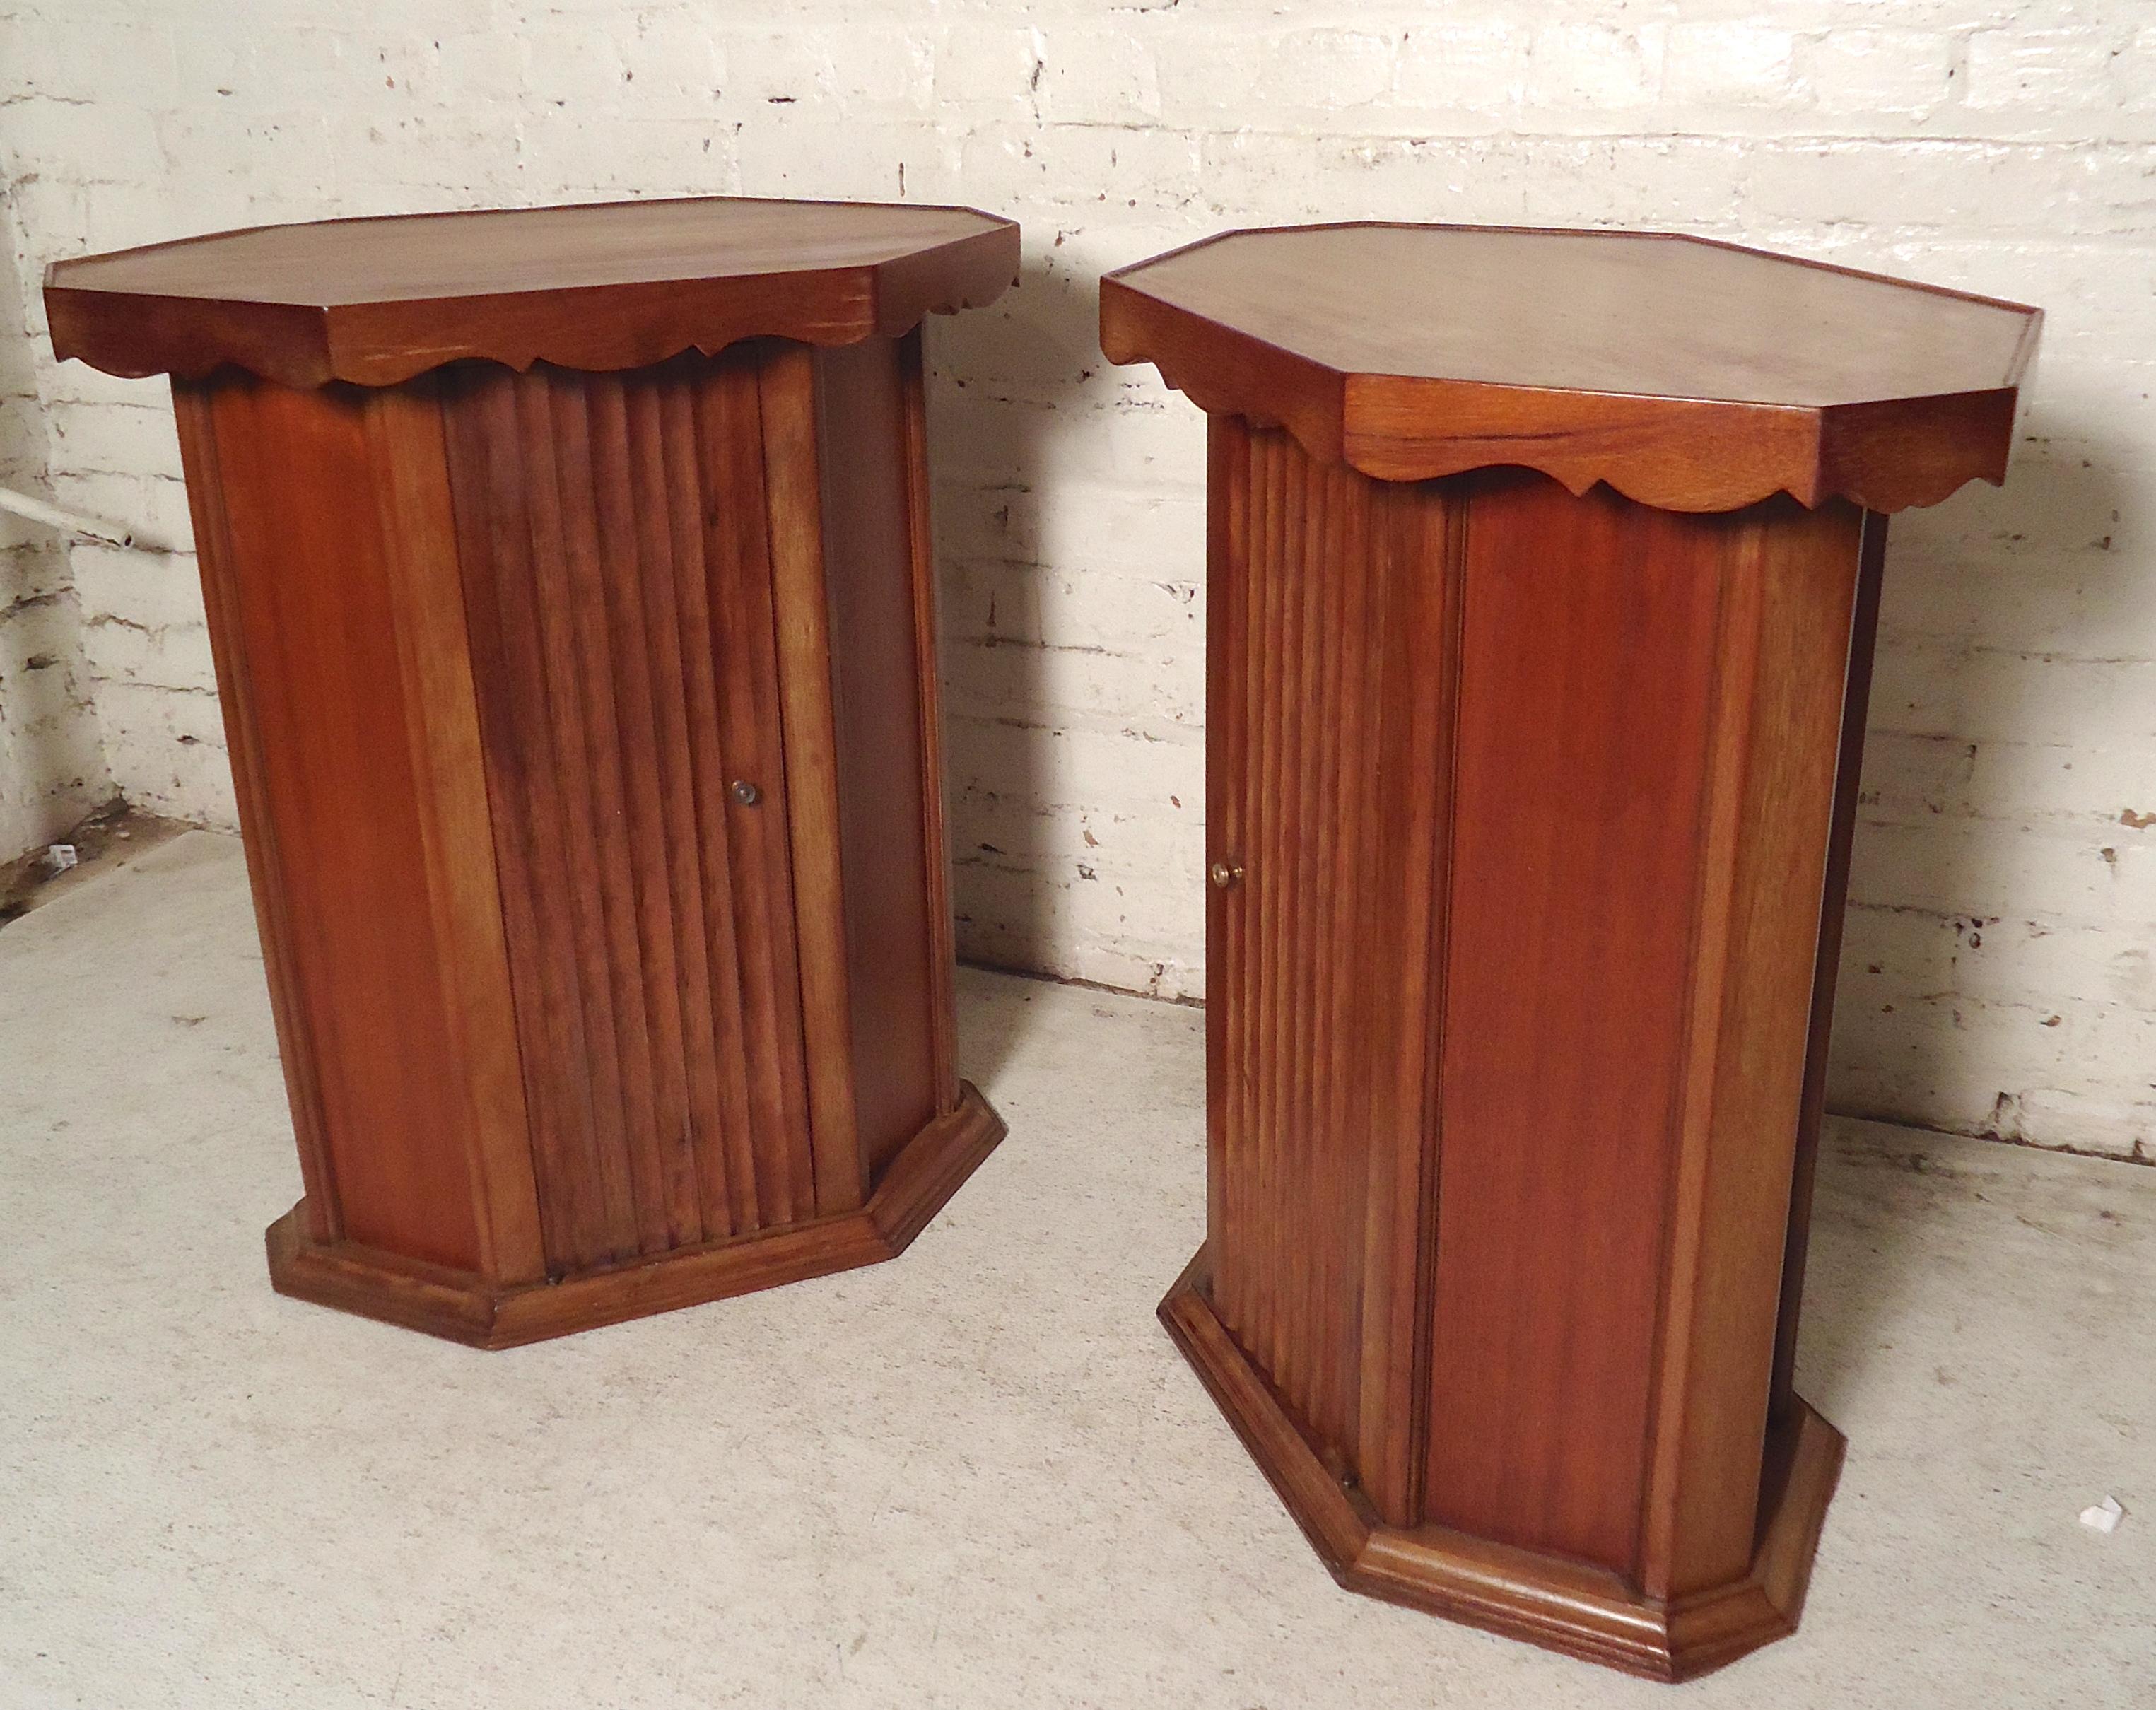 Vintage modern side tables with storage. Attractive top skirt, closed storage with small drawer, warm walnut color.
(Please confirm item location - NY or NJ - with dealer).
  